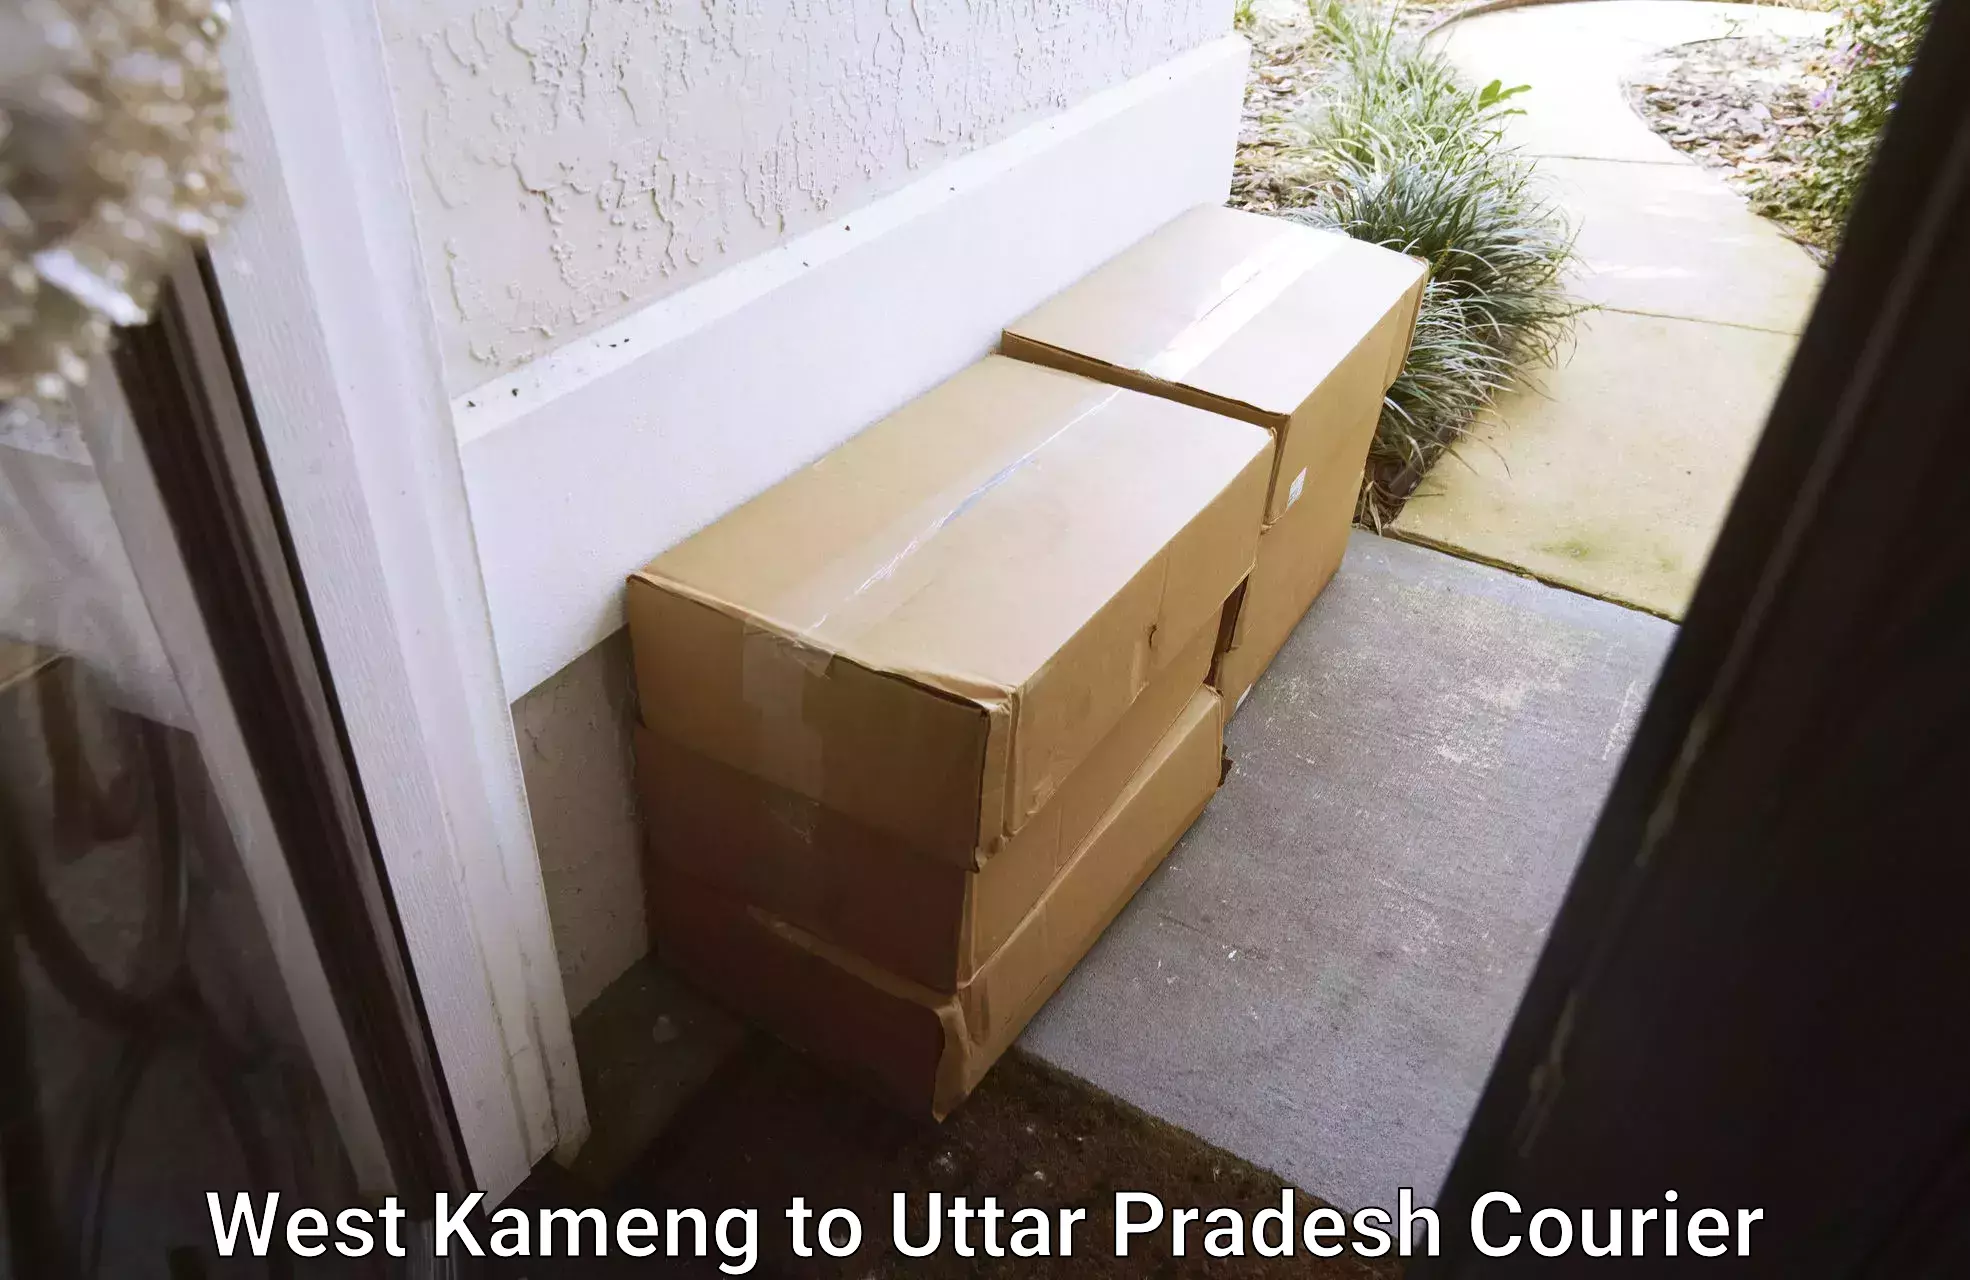 Supply chain delivery in West Kameng to Uttar Pradesh